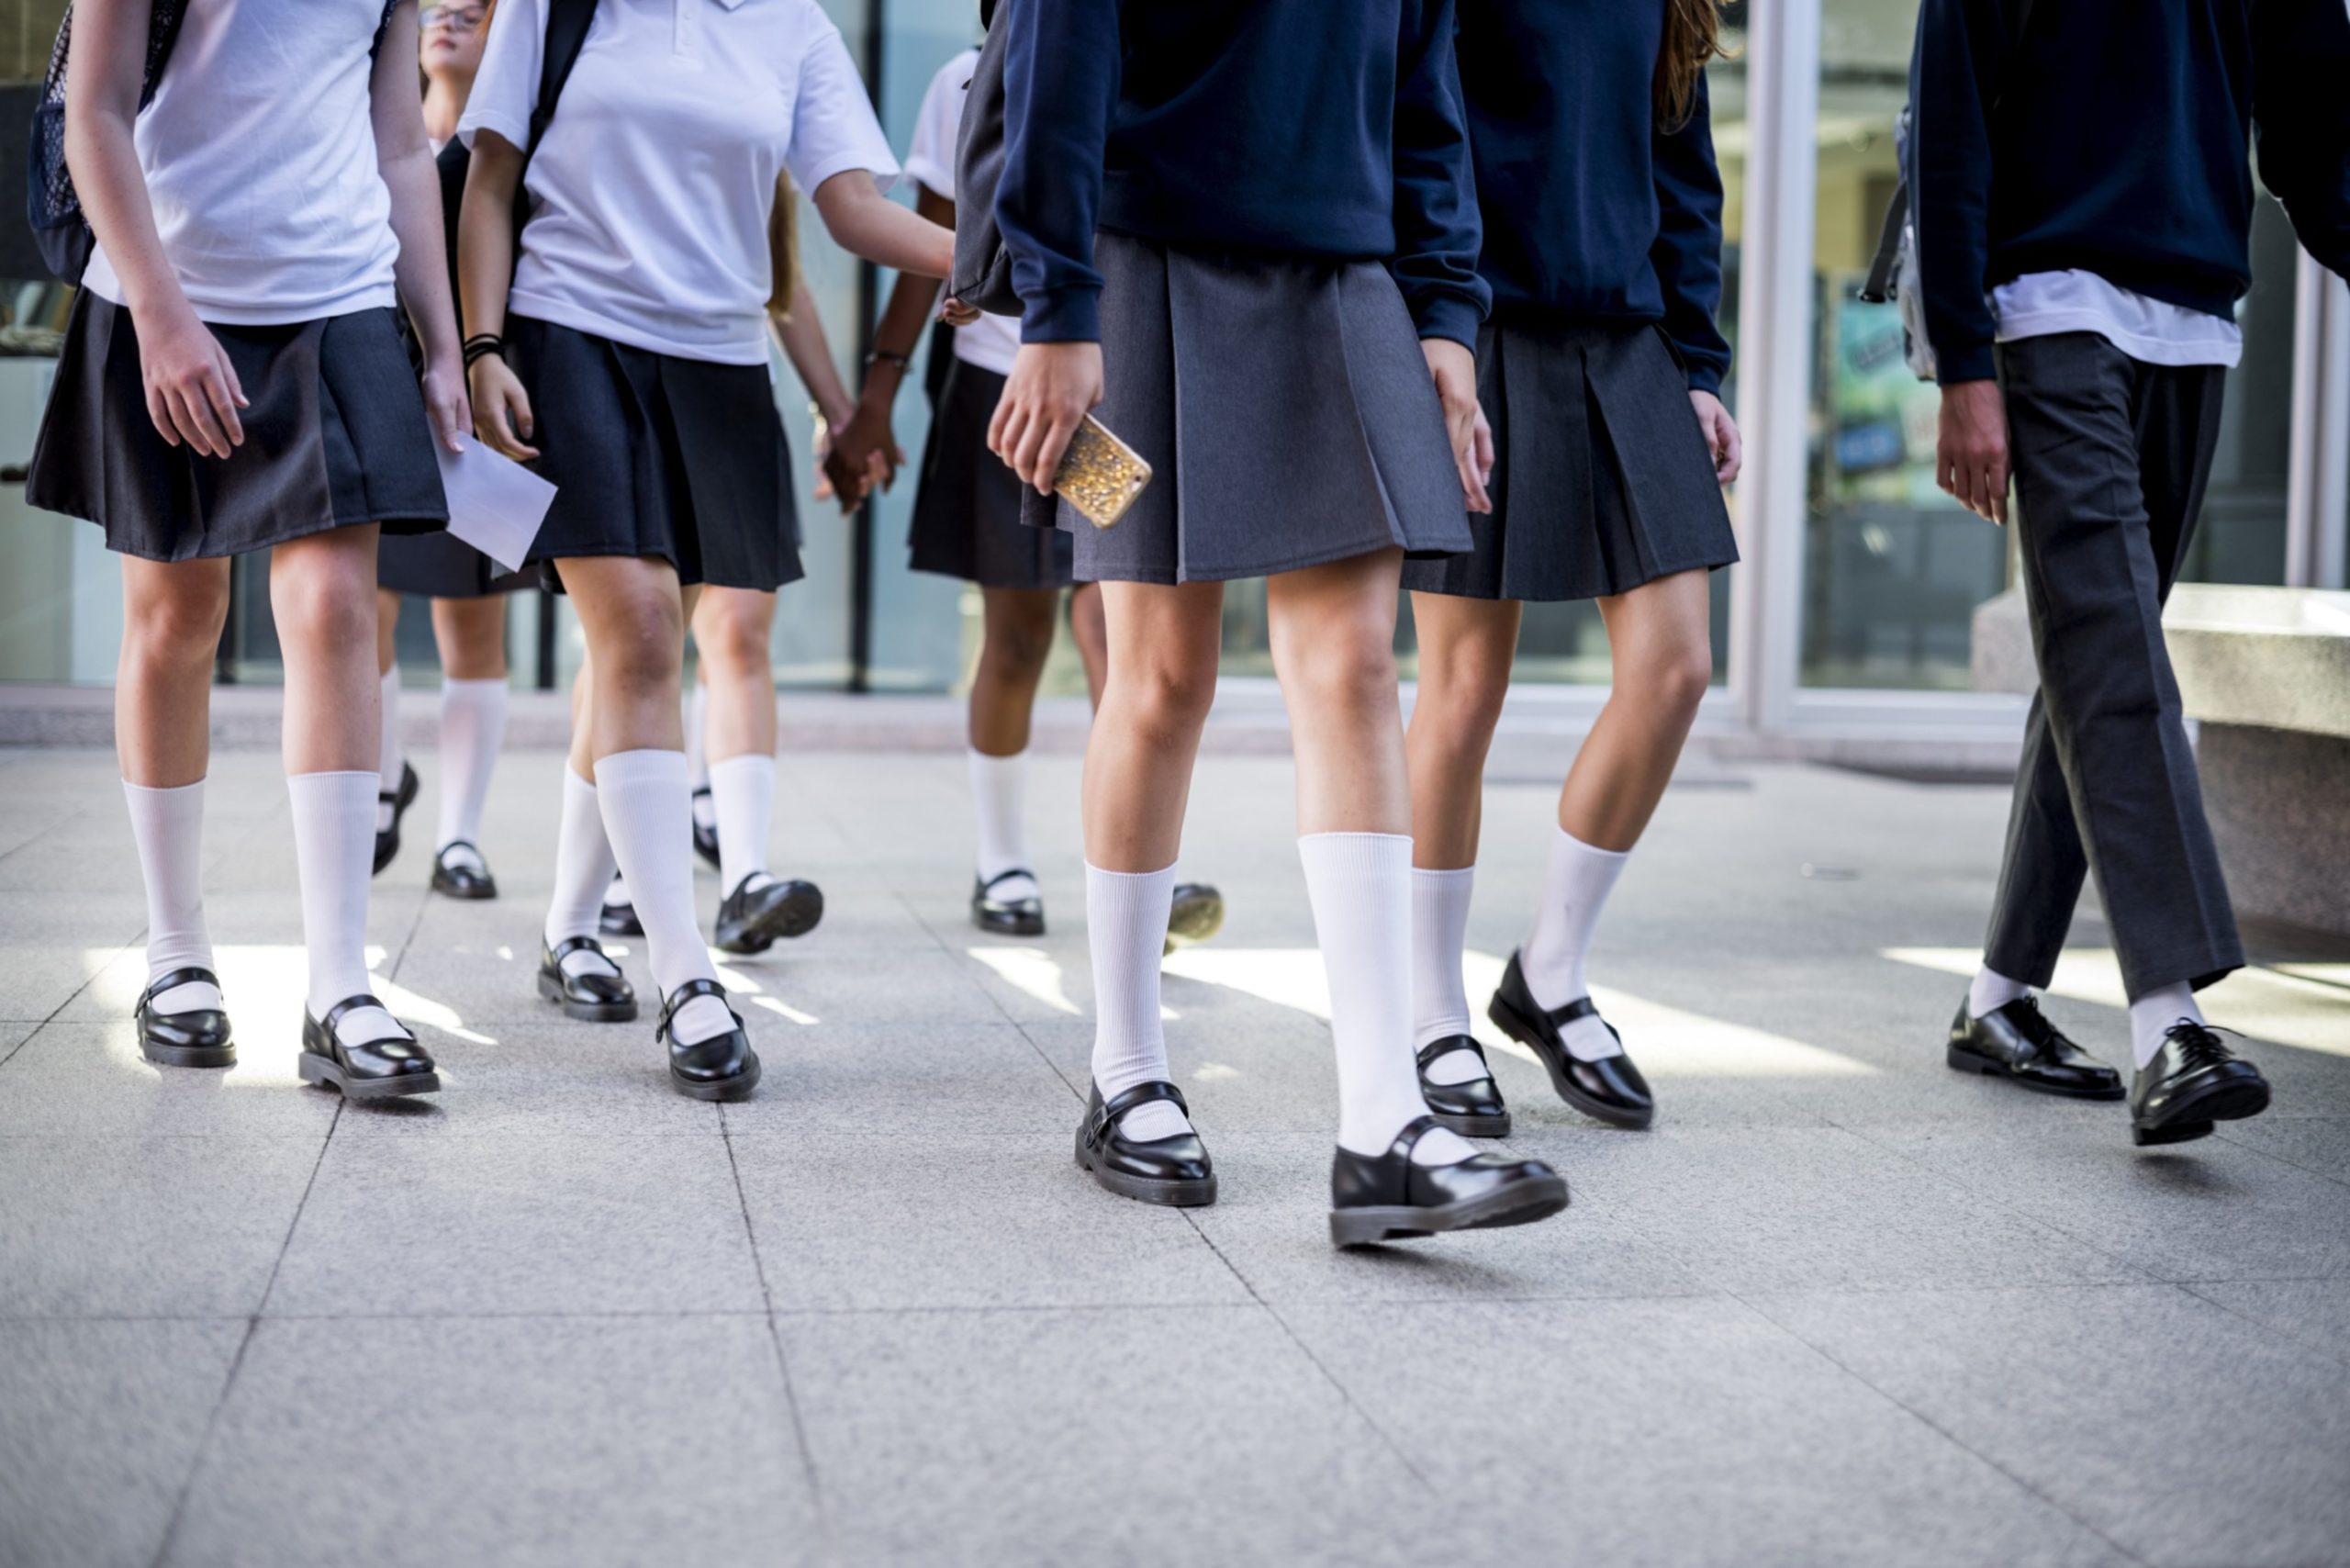 School uniforms may be altered due to the coronavirus crisis.